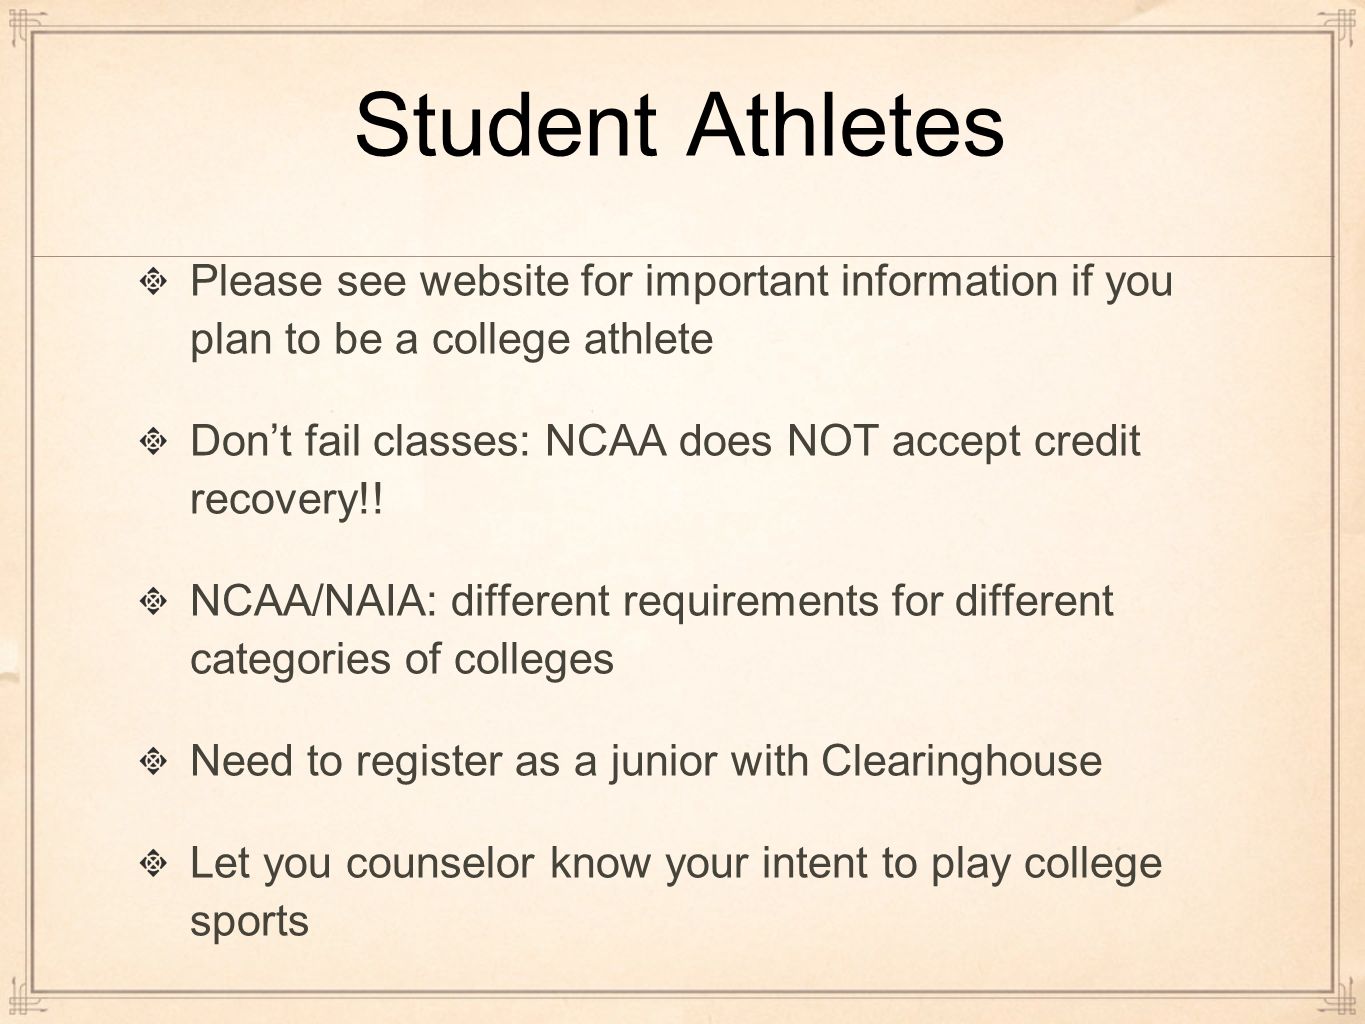 Student Athletes Please see website for important information if you plan to be a college athlete Don’t fail classes: NCAA does NOT accept credit recovery!.